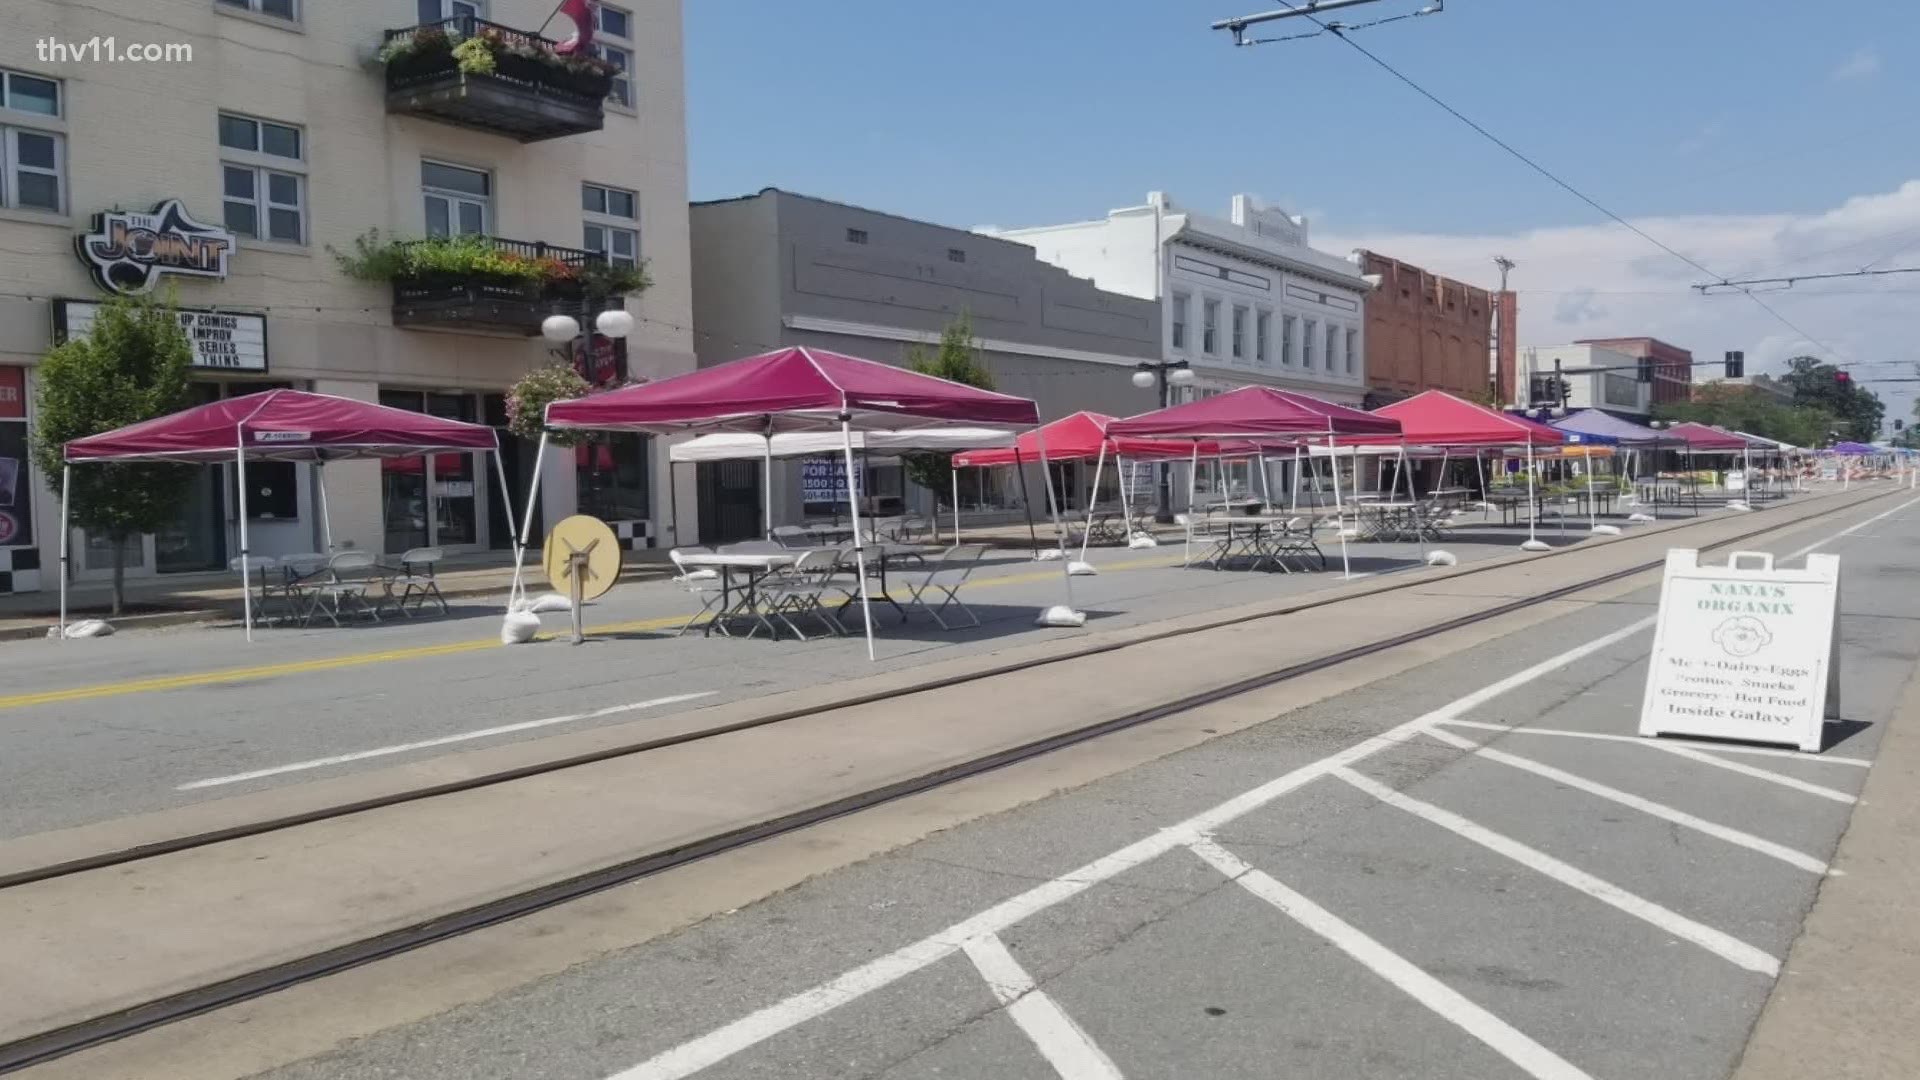 Main Street in downtown North Little Rock transforms into an outdoor dining space on the weekends but is causing some businesses to lose money.